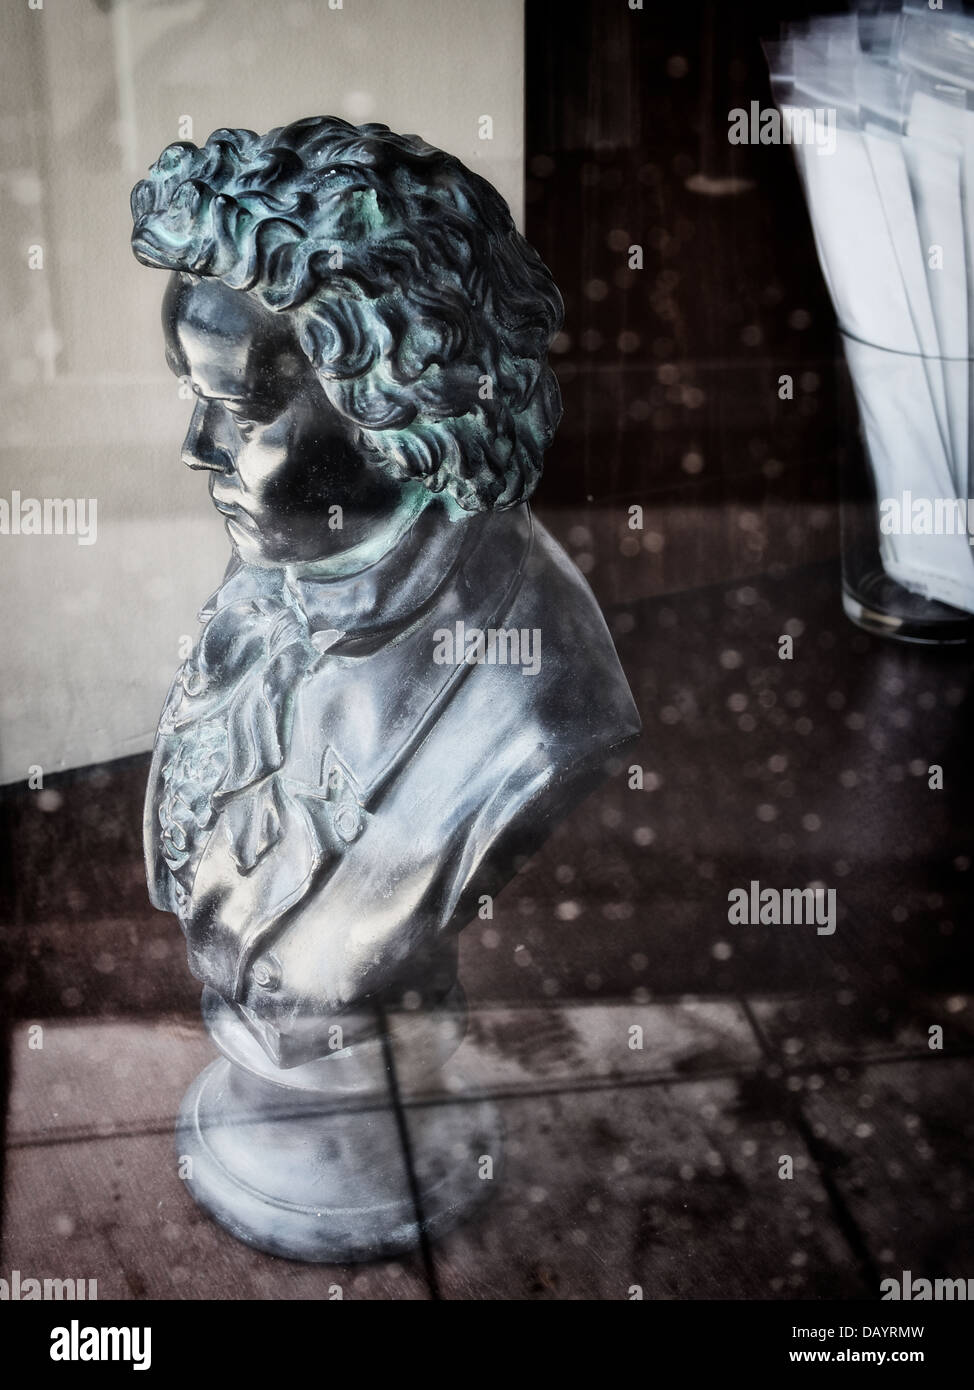 Bust of Beethoven mysteriously stares out a window. Stock Photo